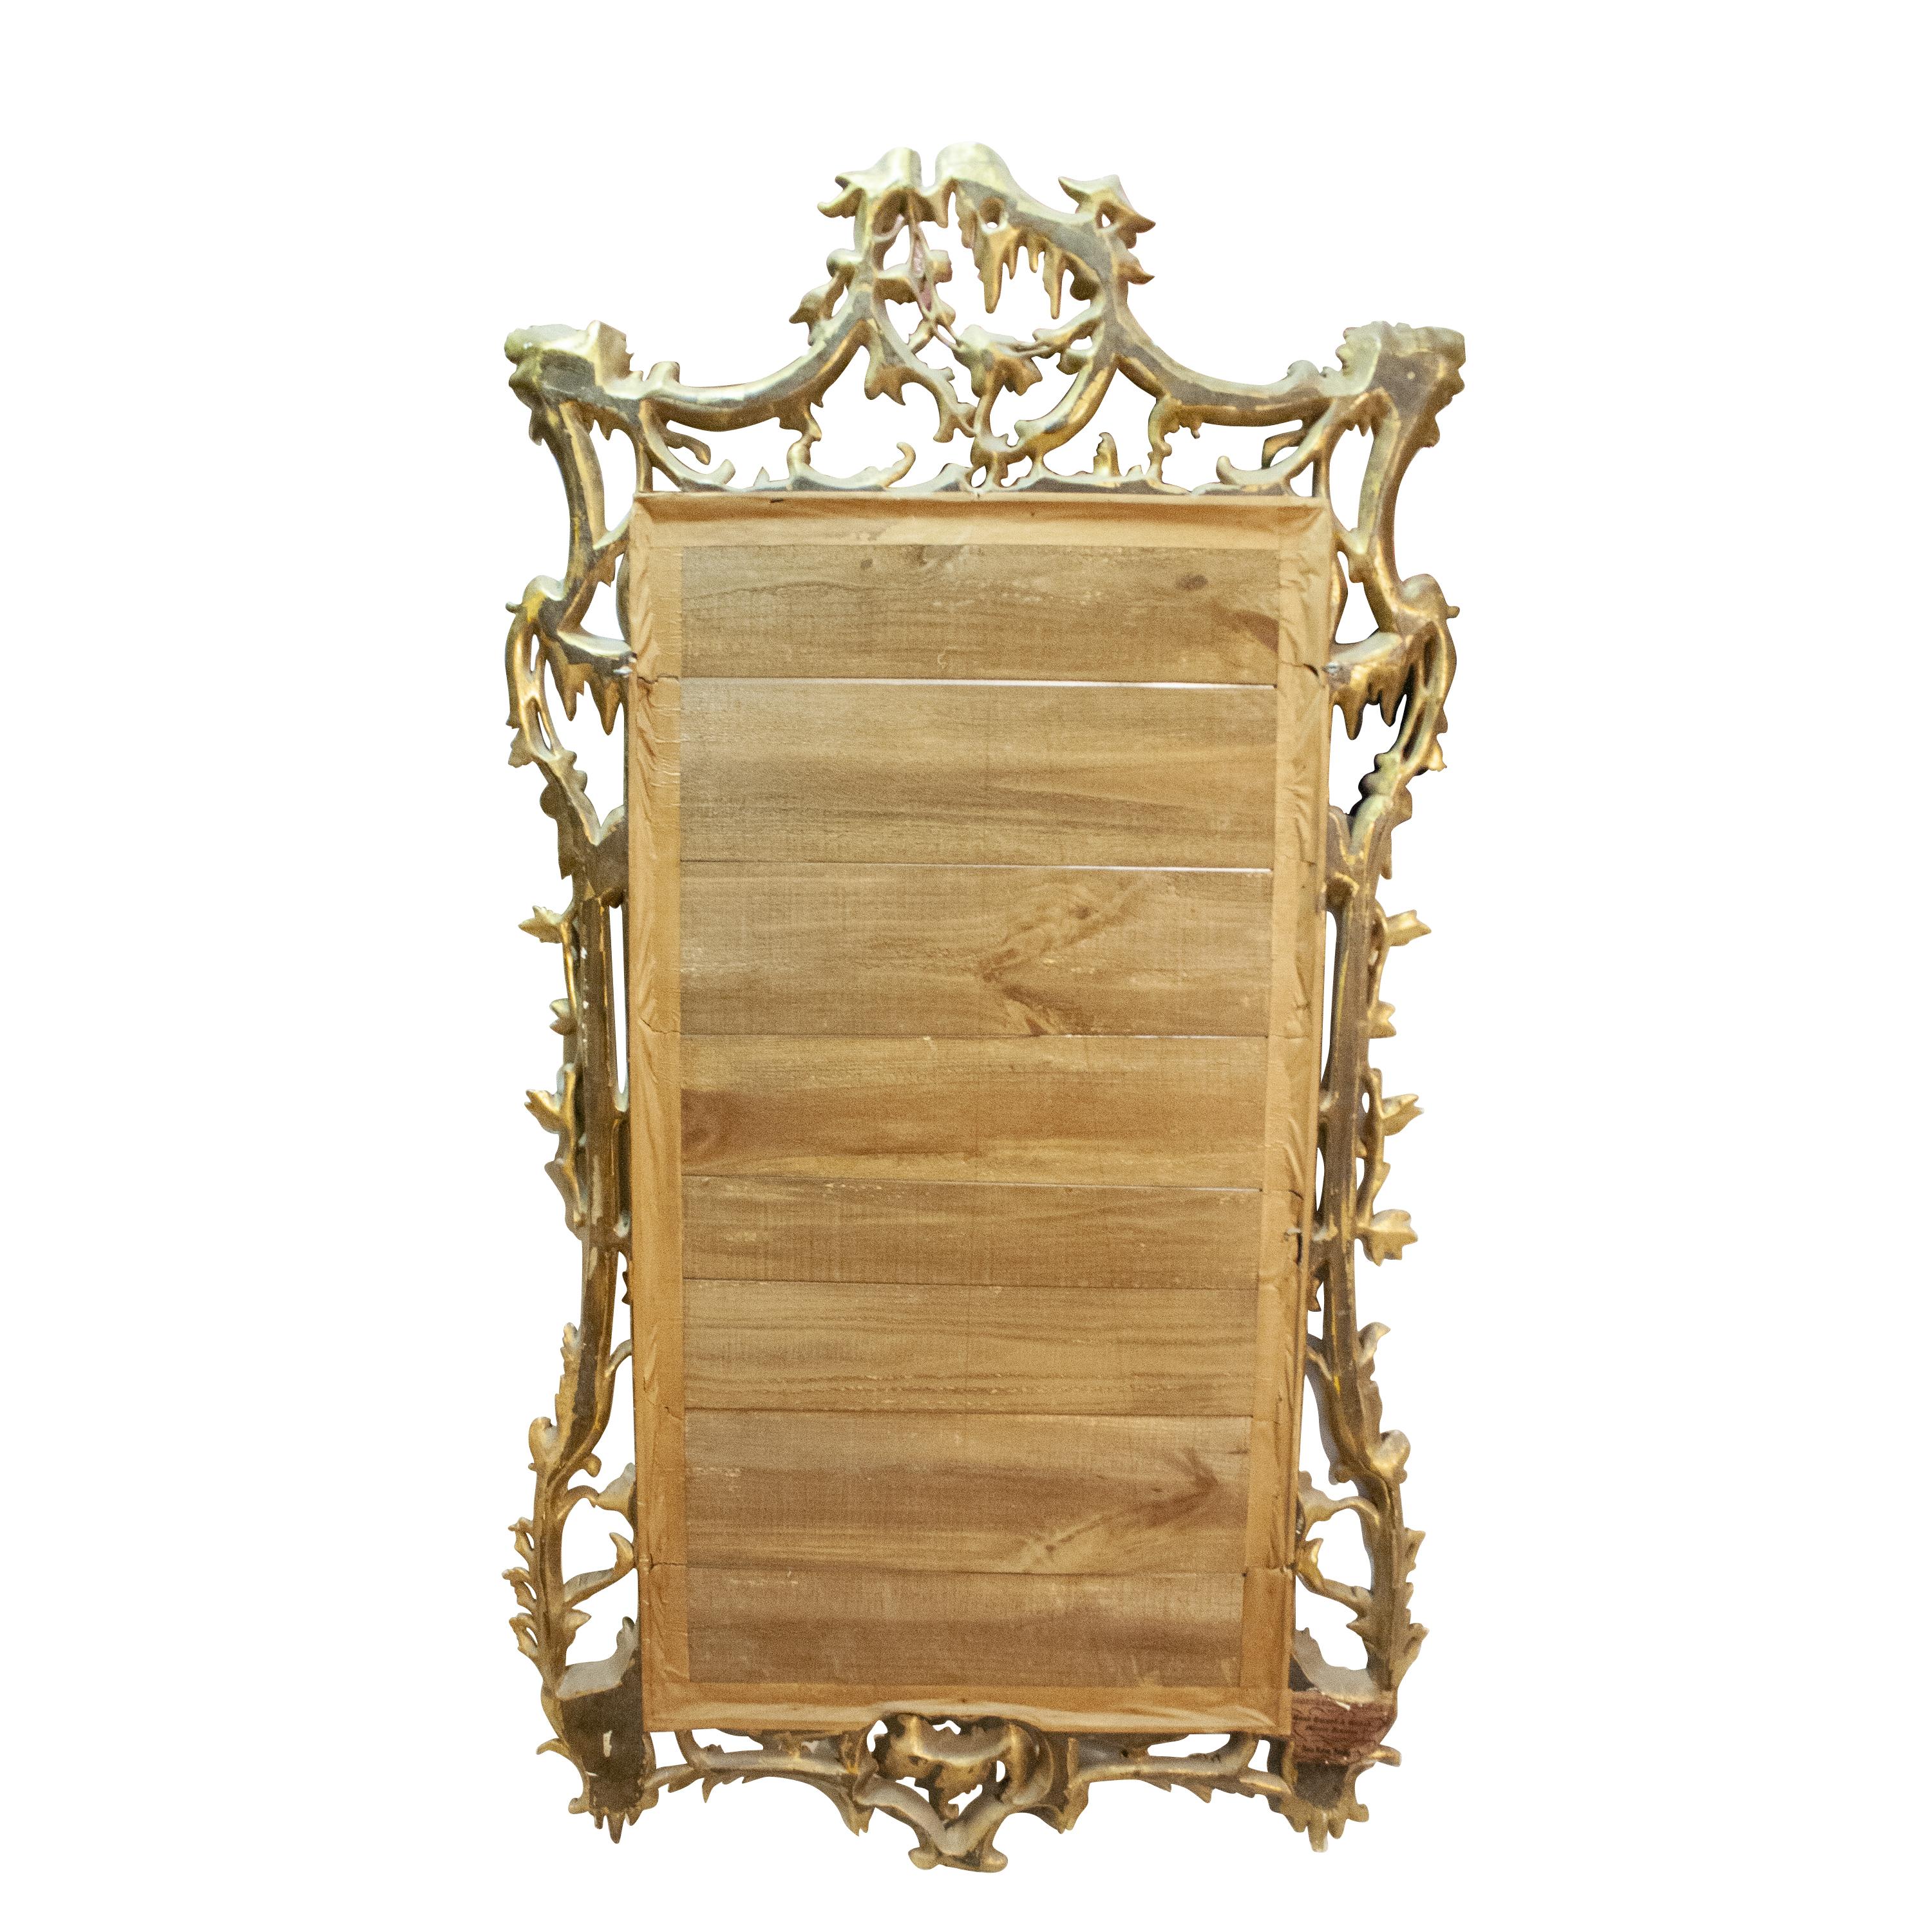 Neoclassical Regency Rectangular Handcrafted Gold Foil Wood Mirror Spain, 1970 For Sale